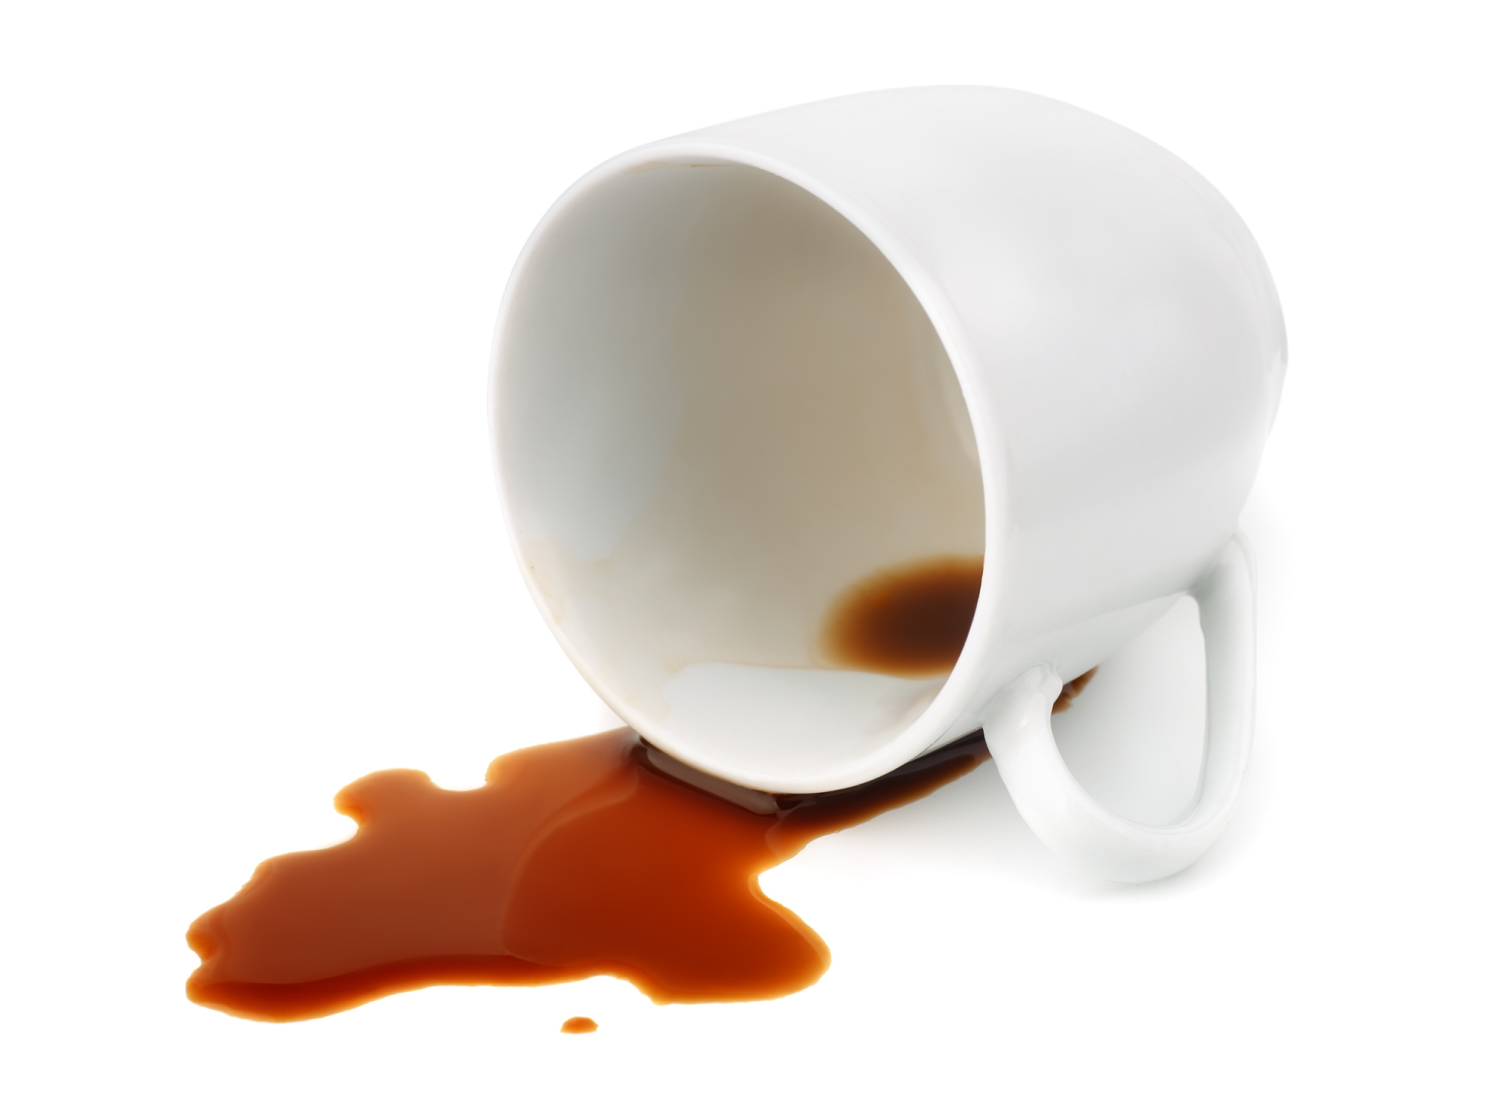 A spilled cup of coffee.